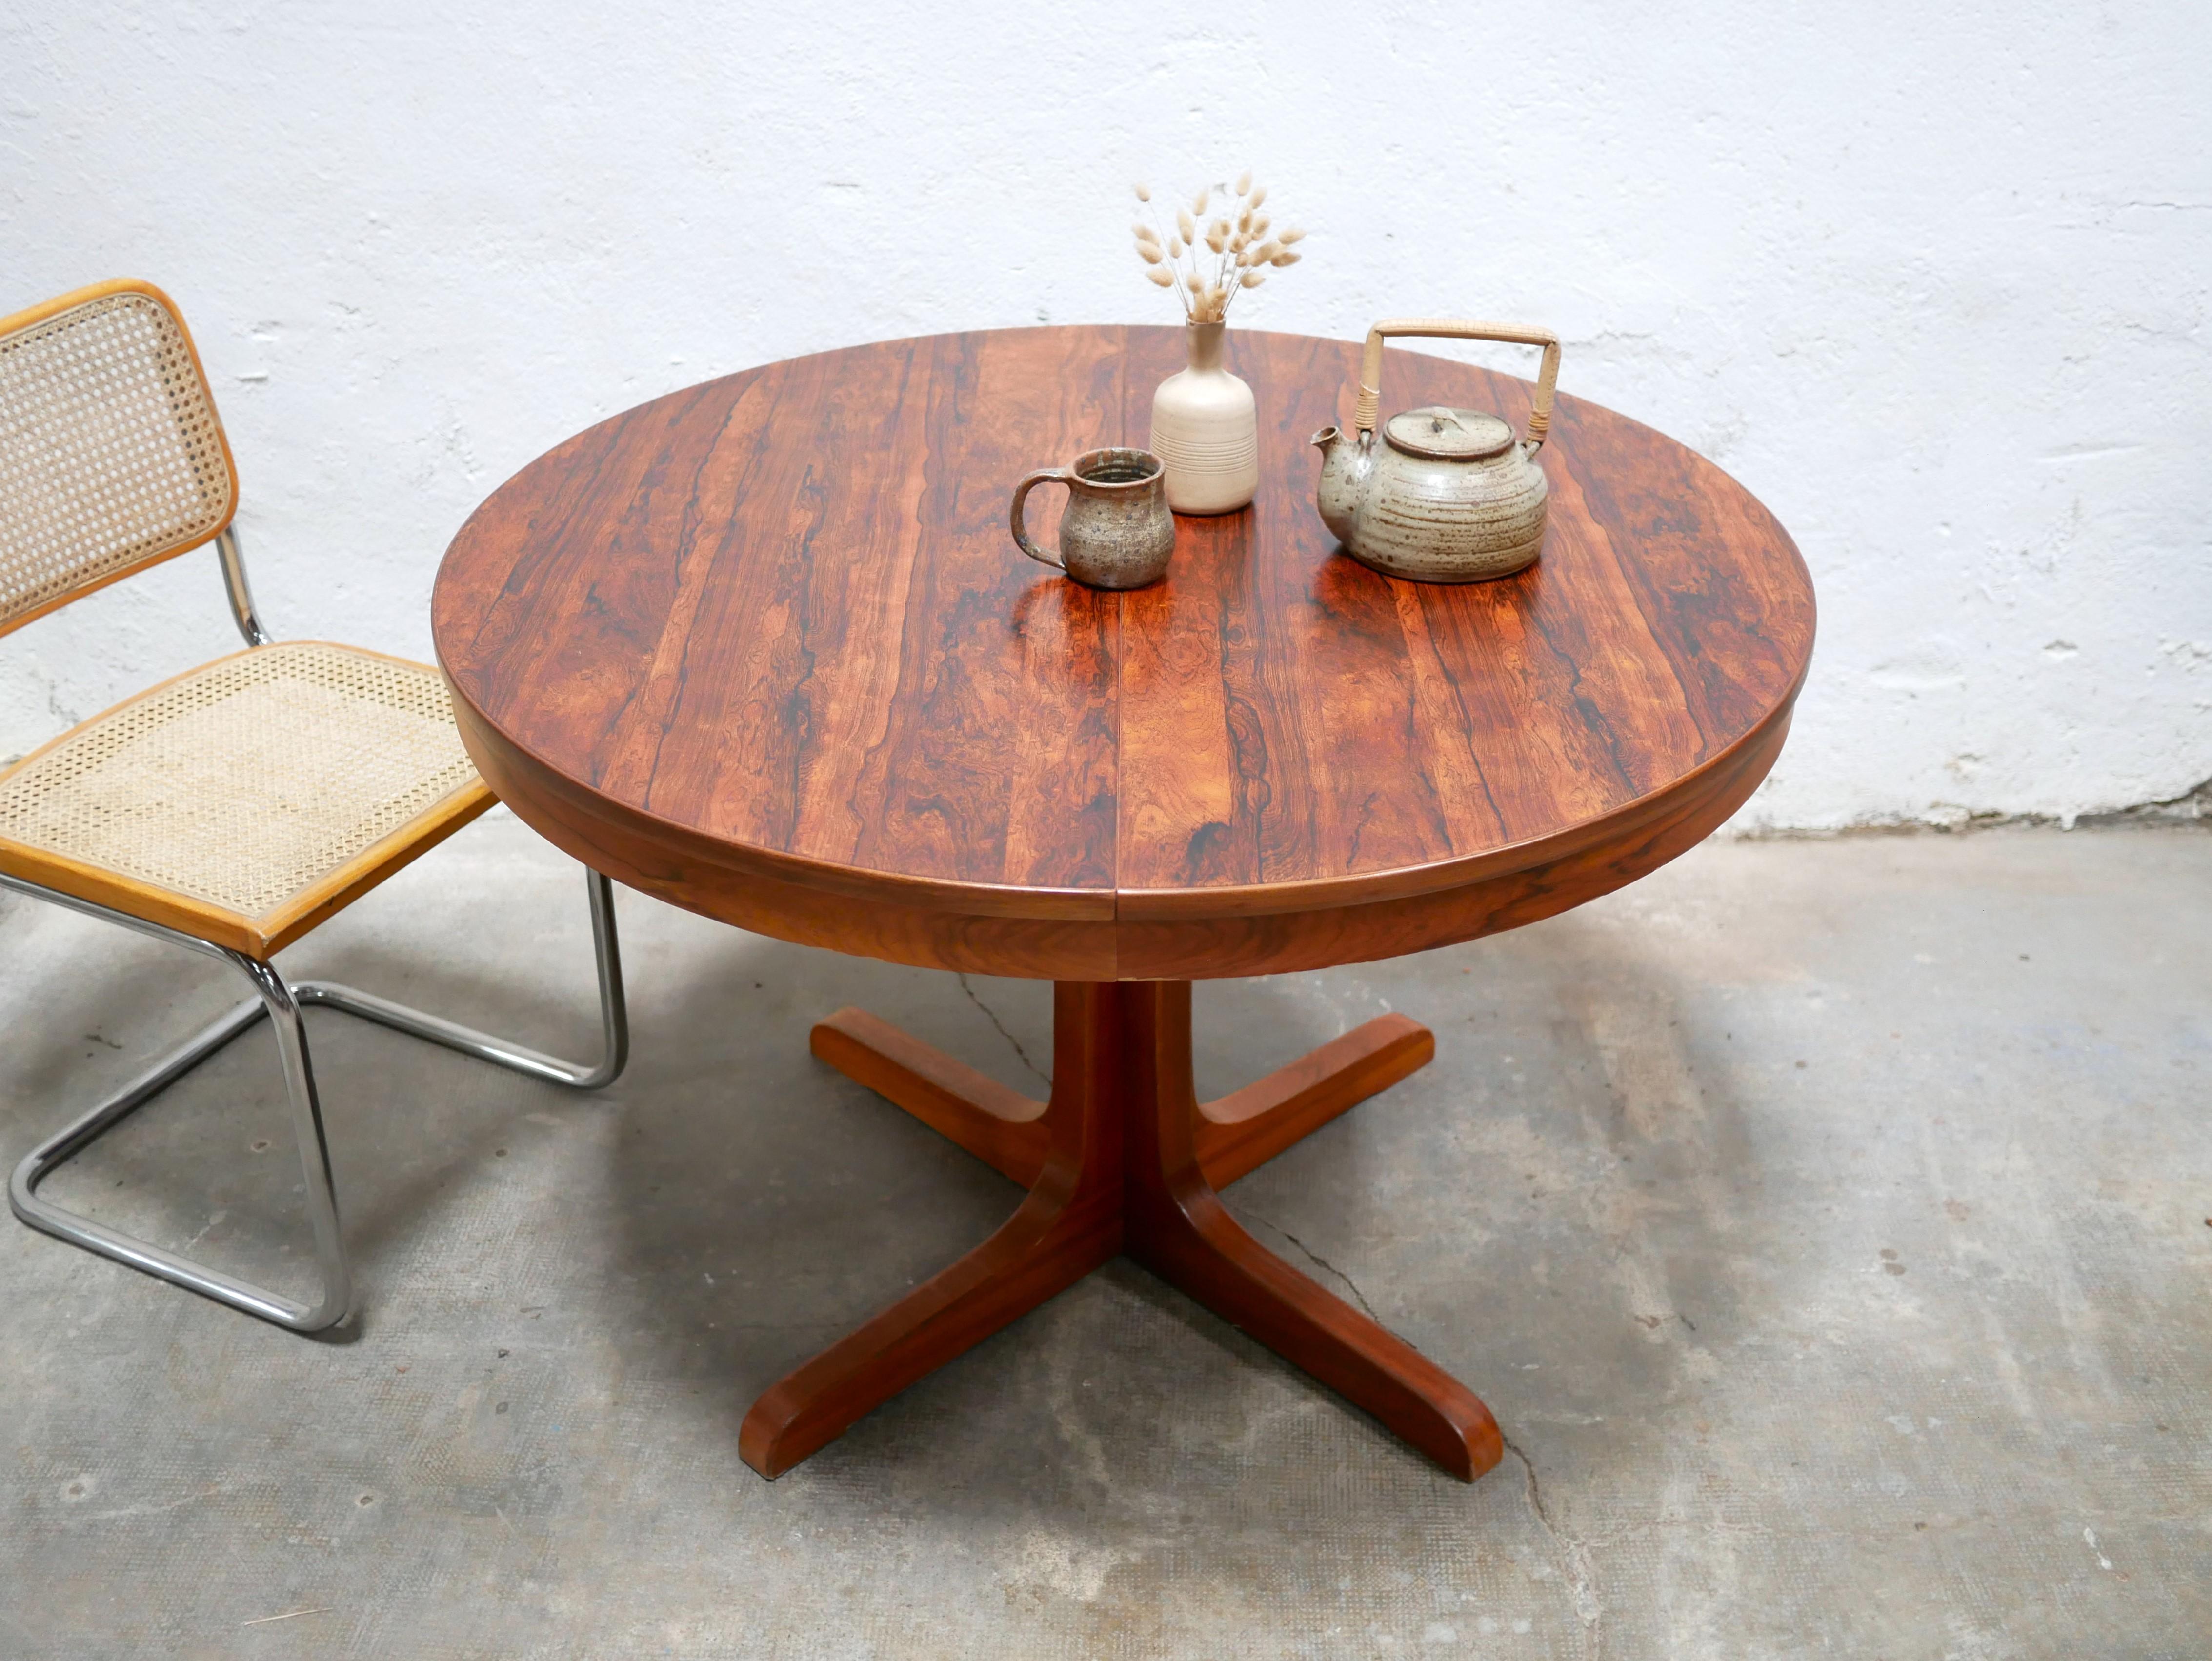 Scandinavian rosewood dining table dating from the 60s.

Its lines are sober, refined. Its round rosewood top gives it a lot of character and elegance. Dining table with timeless charm that will easily match a current decoration.
The color of the